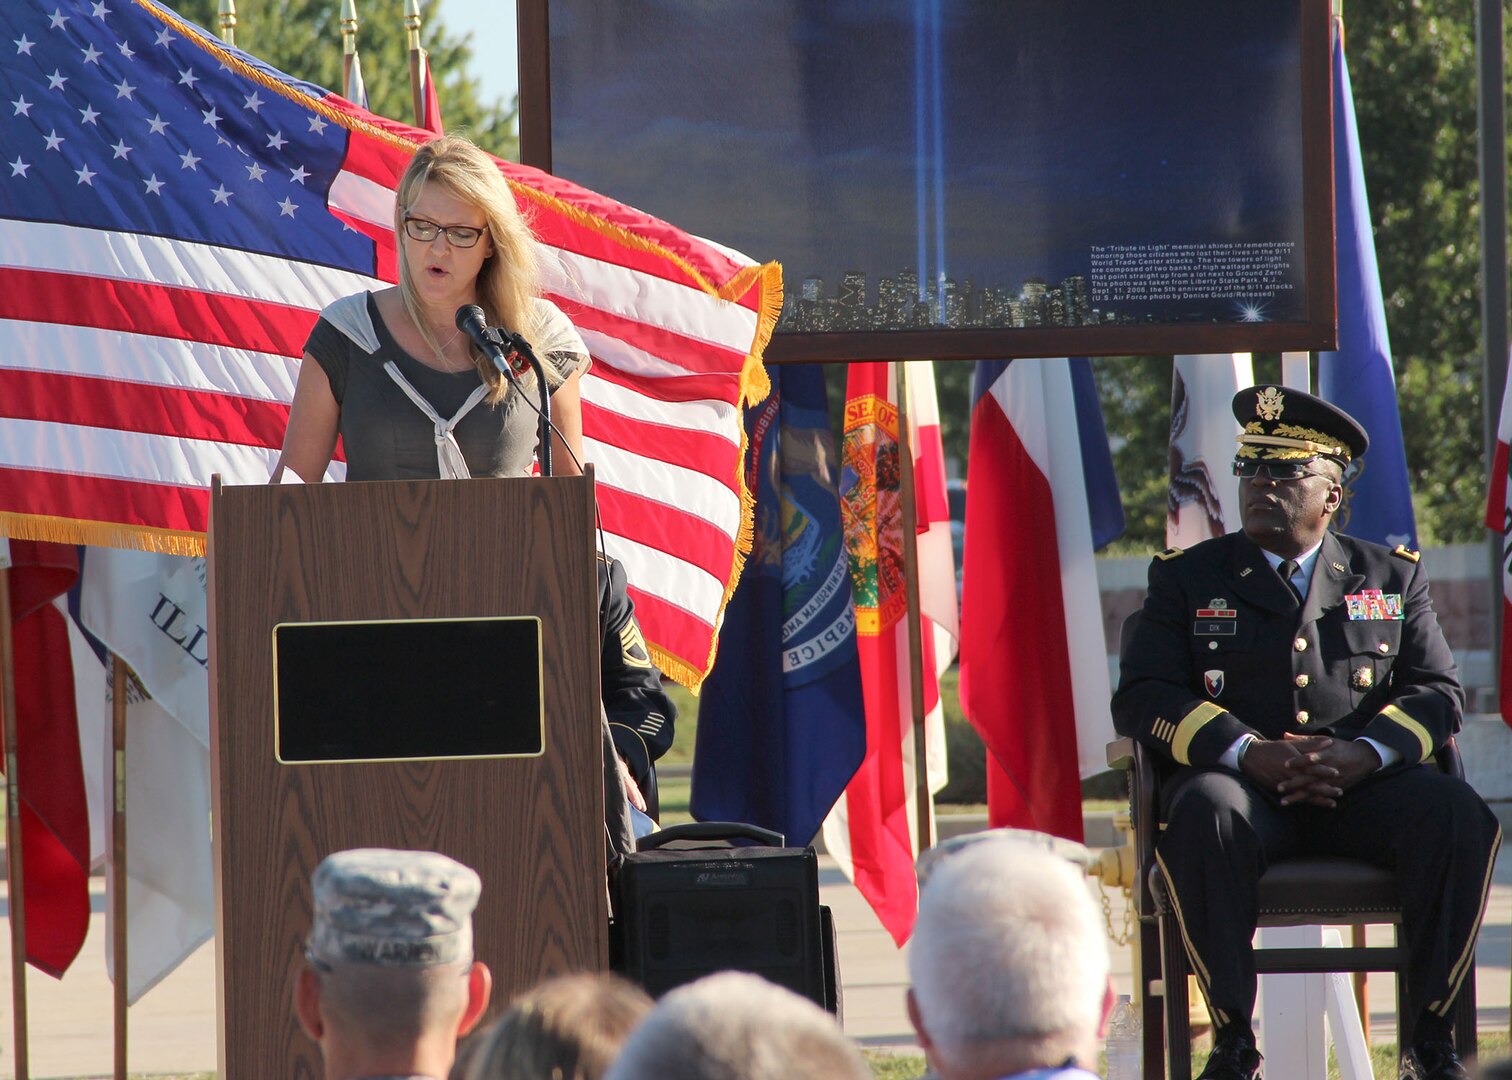 Brig. Gen. Richard B. Dix listens as Carmen Gordon, the Gold Star wife of Army Master Sgt. Gary Gordon, speaks of her husband’s heroics and ultimate sacrifice during a Patriot Day and POW/MIA Remembrance Ceremony. (Photo by Sherre Mitten-Bell, DLA Distribution Susquehanna, Pa.)